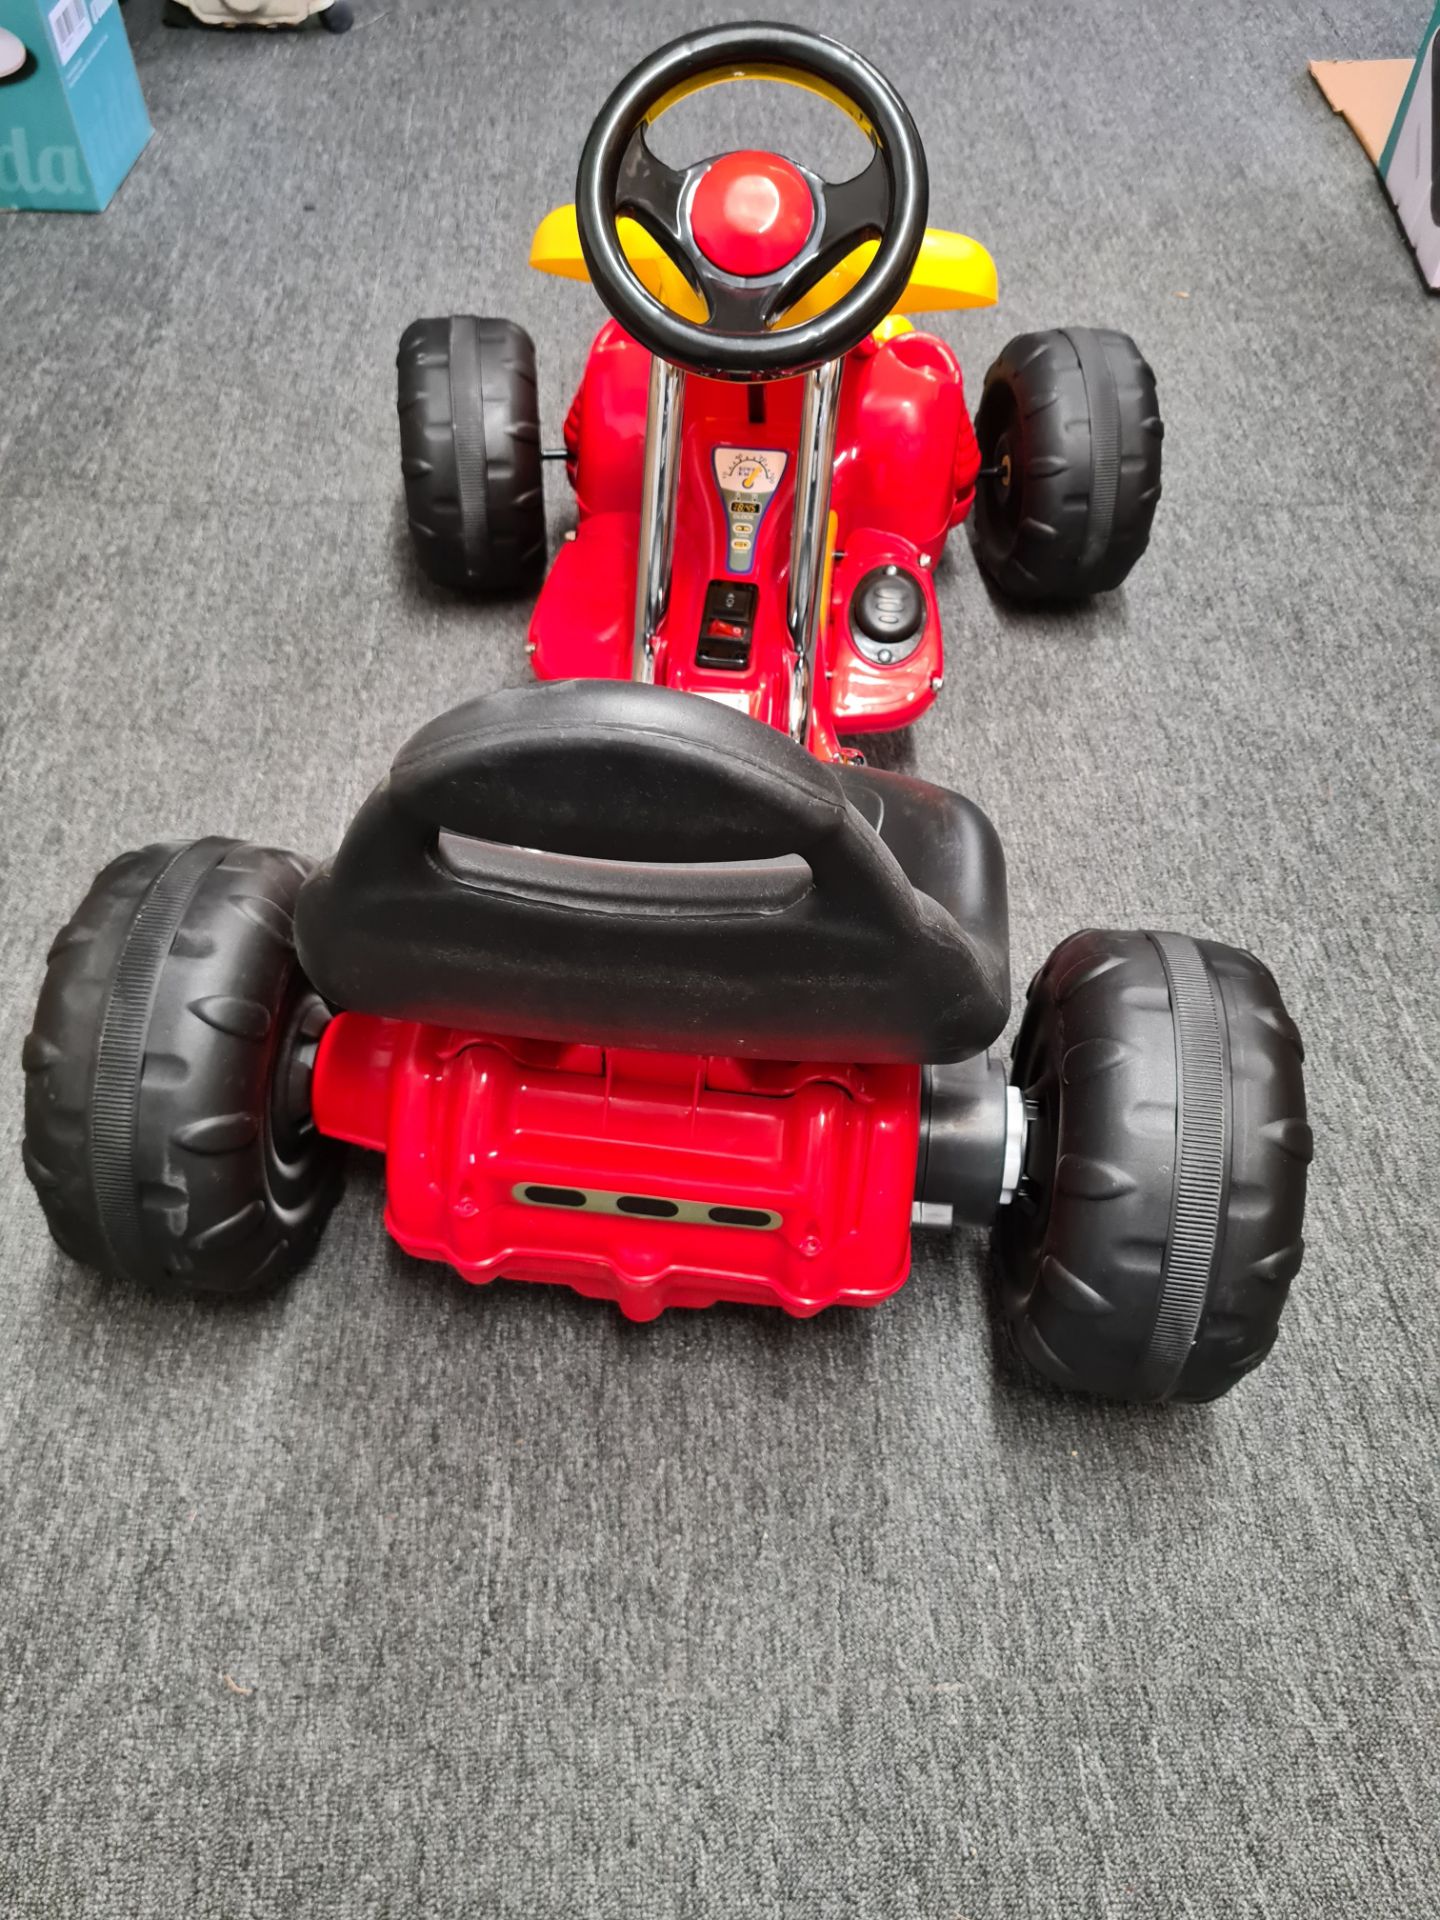 10 X ELECTRIC 6V RIDE ON GO KART - RED / YELLOW £1500 - BRAND NEW FOR KIDS - Bild 4 aus 10